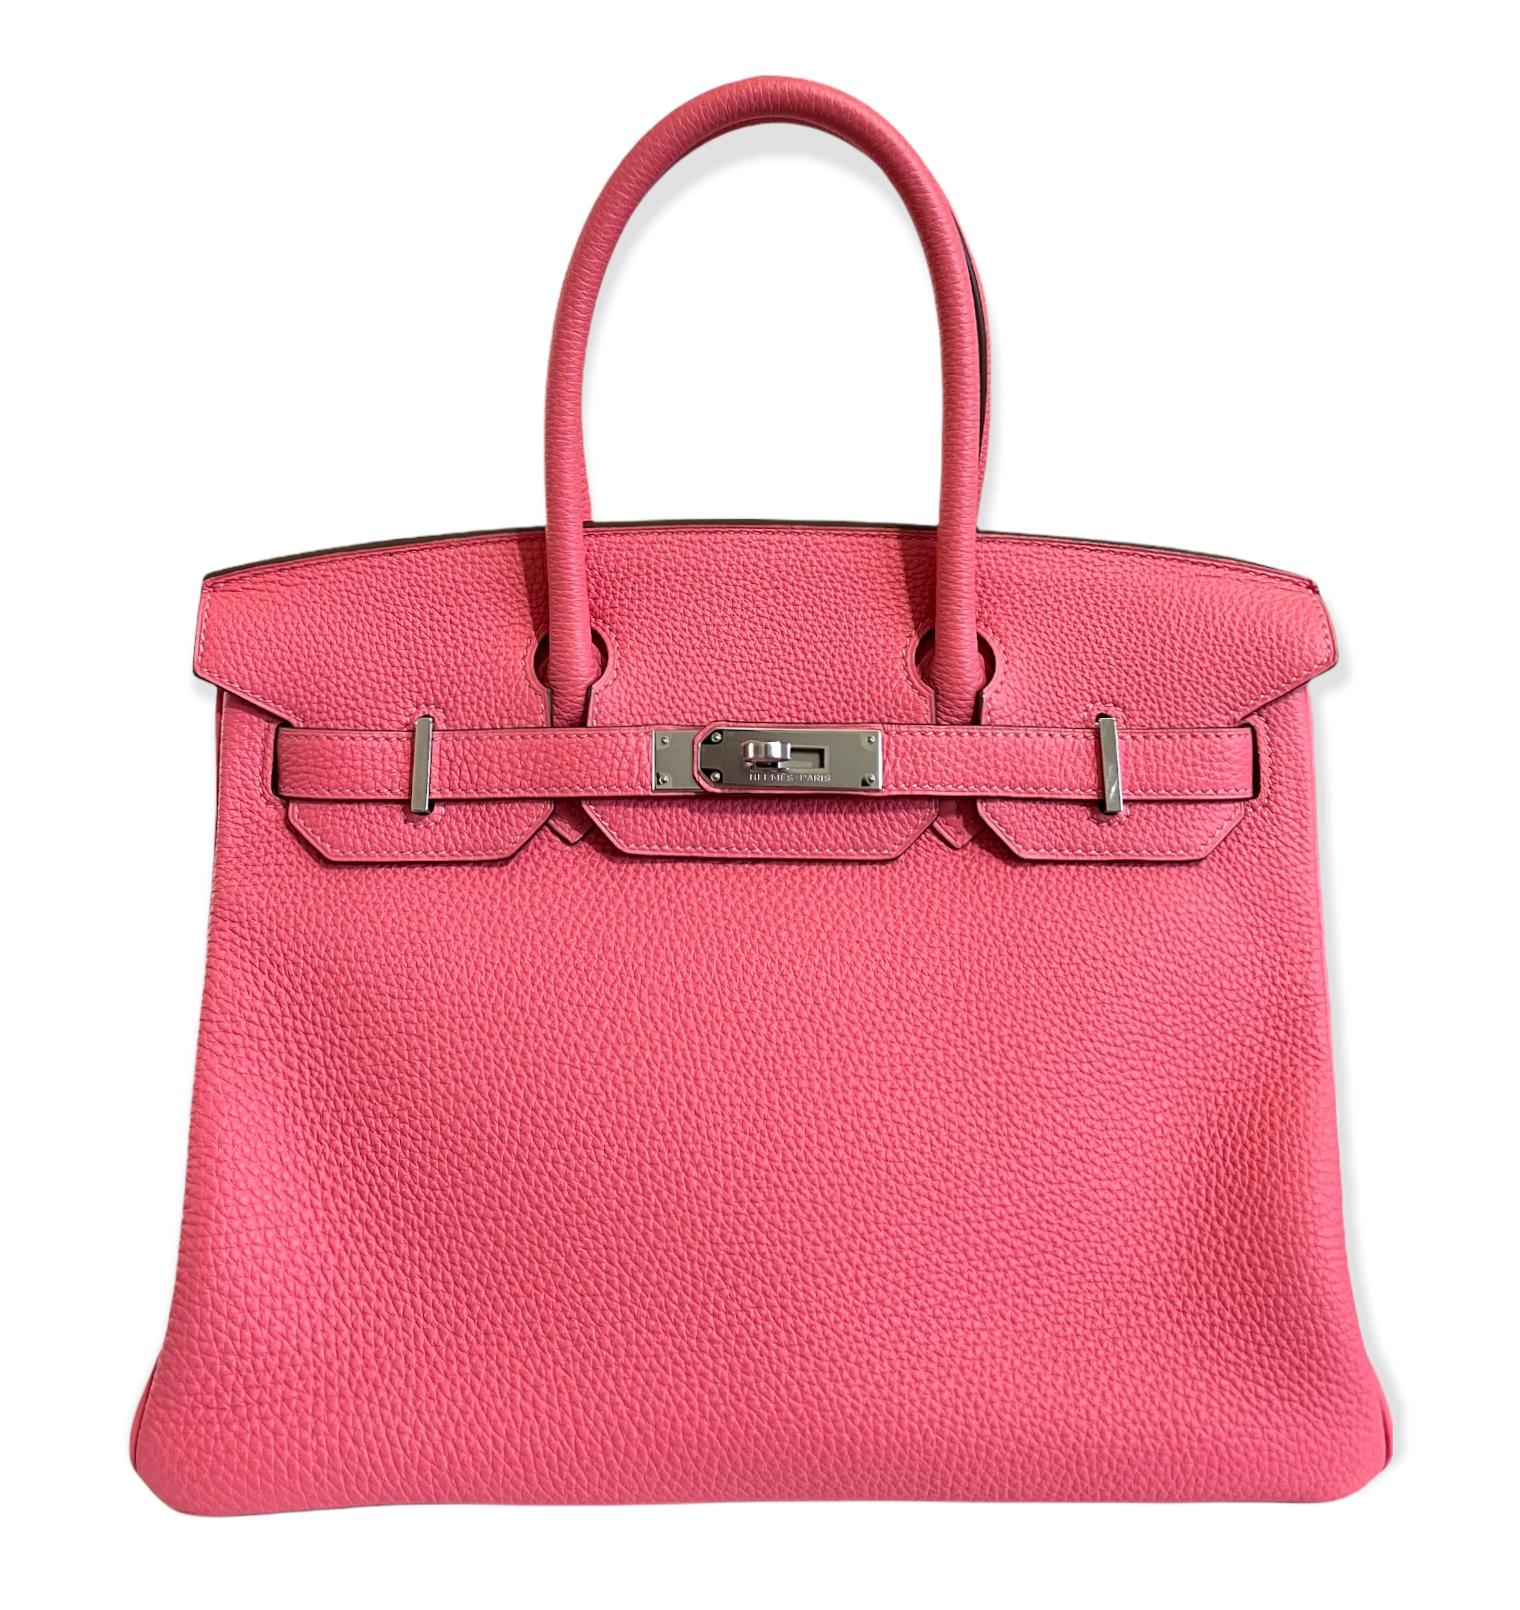 Stunning Like New Hermes Birkin 30 Rose Lipstick Palladium Hardware. Plastic on Hardware, Excellent corners and Structure.

Shop with confidence from Lux Addicts. Authenticity Guaranteed! 